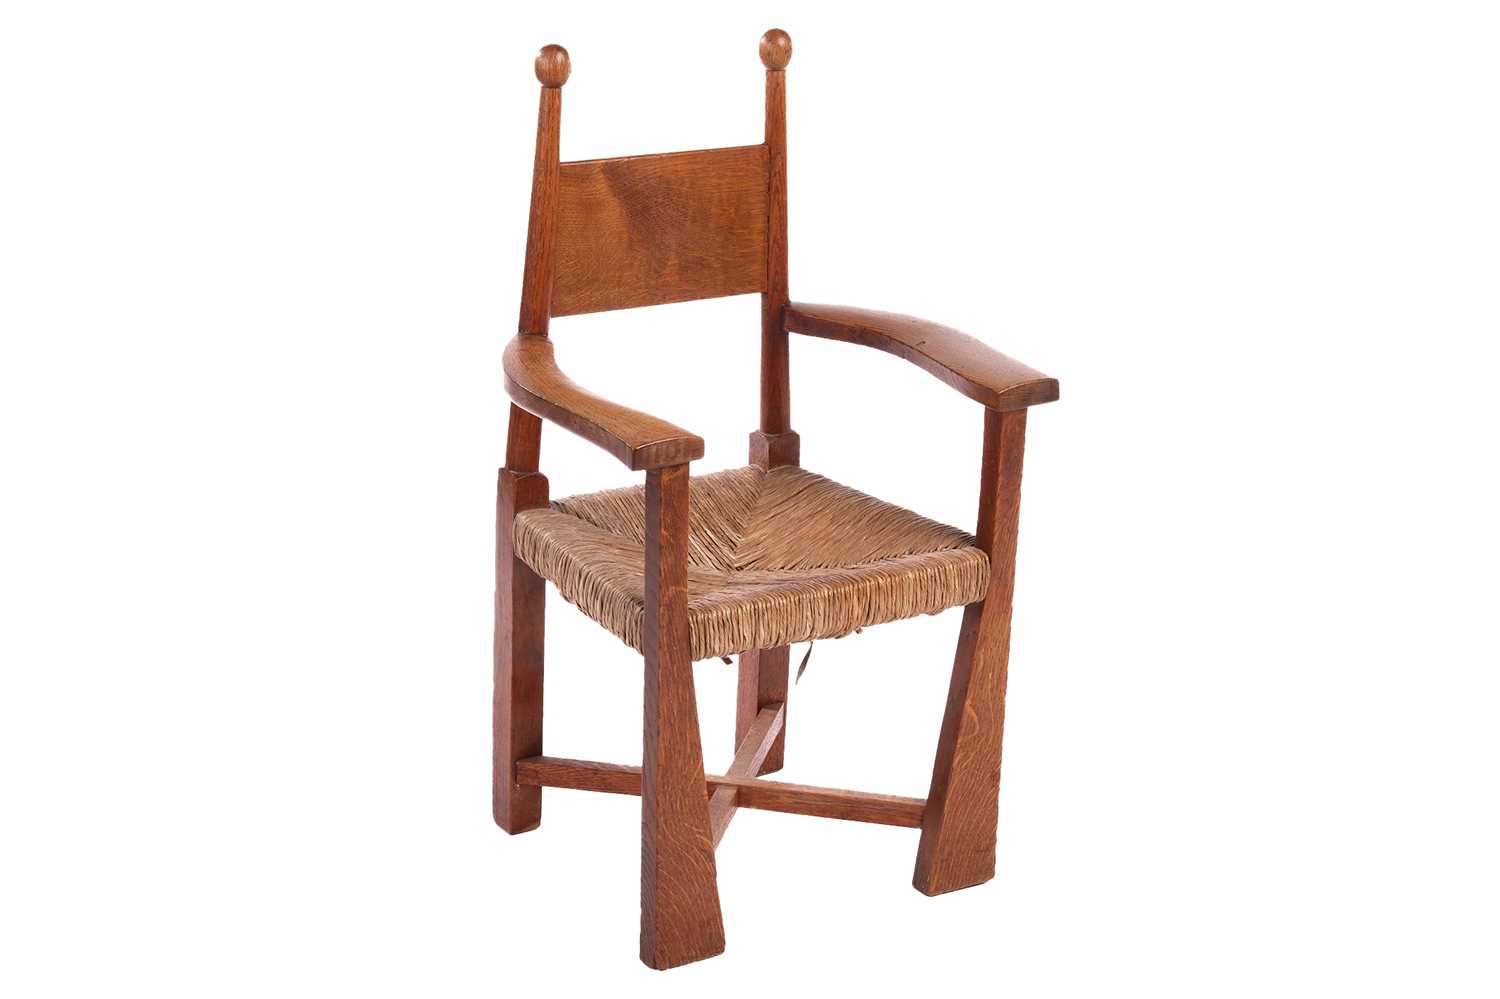 An Arts & Crafts oak rush-seated child's chair, probably designed by E.J. Punnett for William